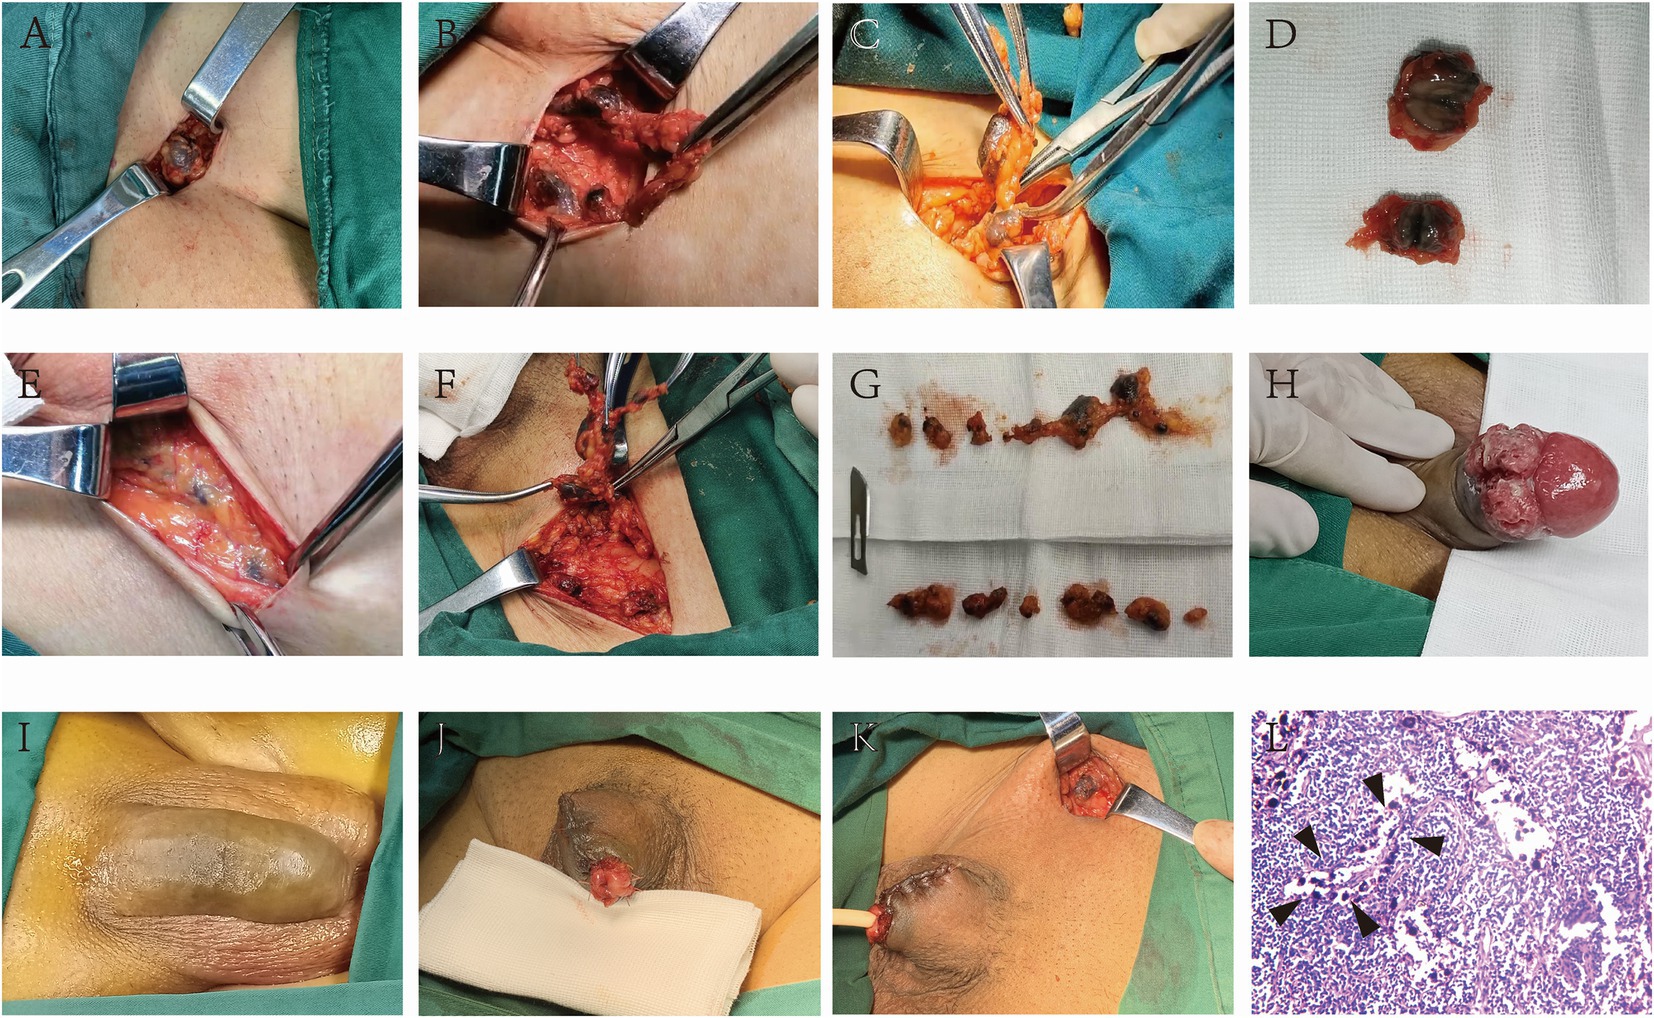 Frontiers Study On Naked Eye Tracing Of Inguinal Sentinel Lymph Nodes In Penile Cancer